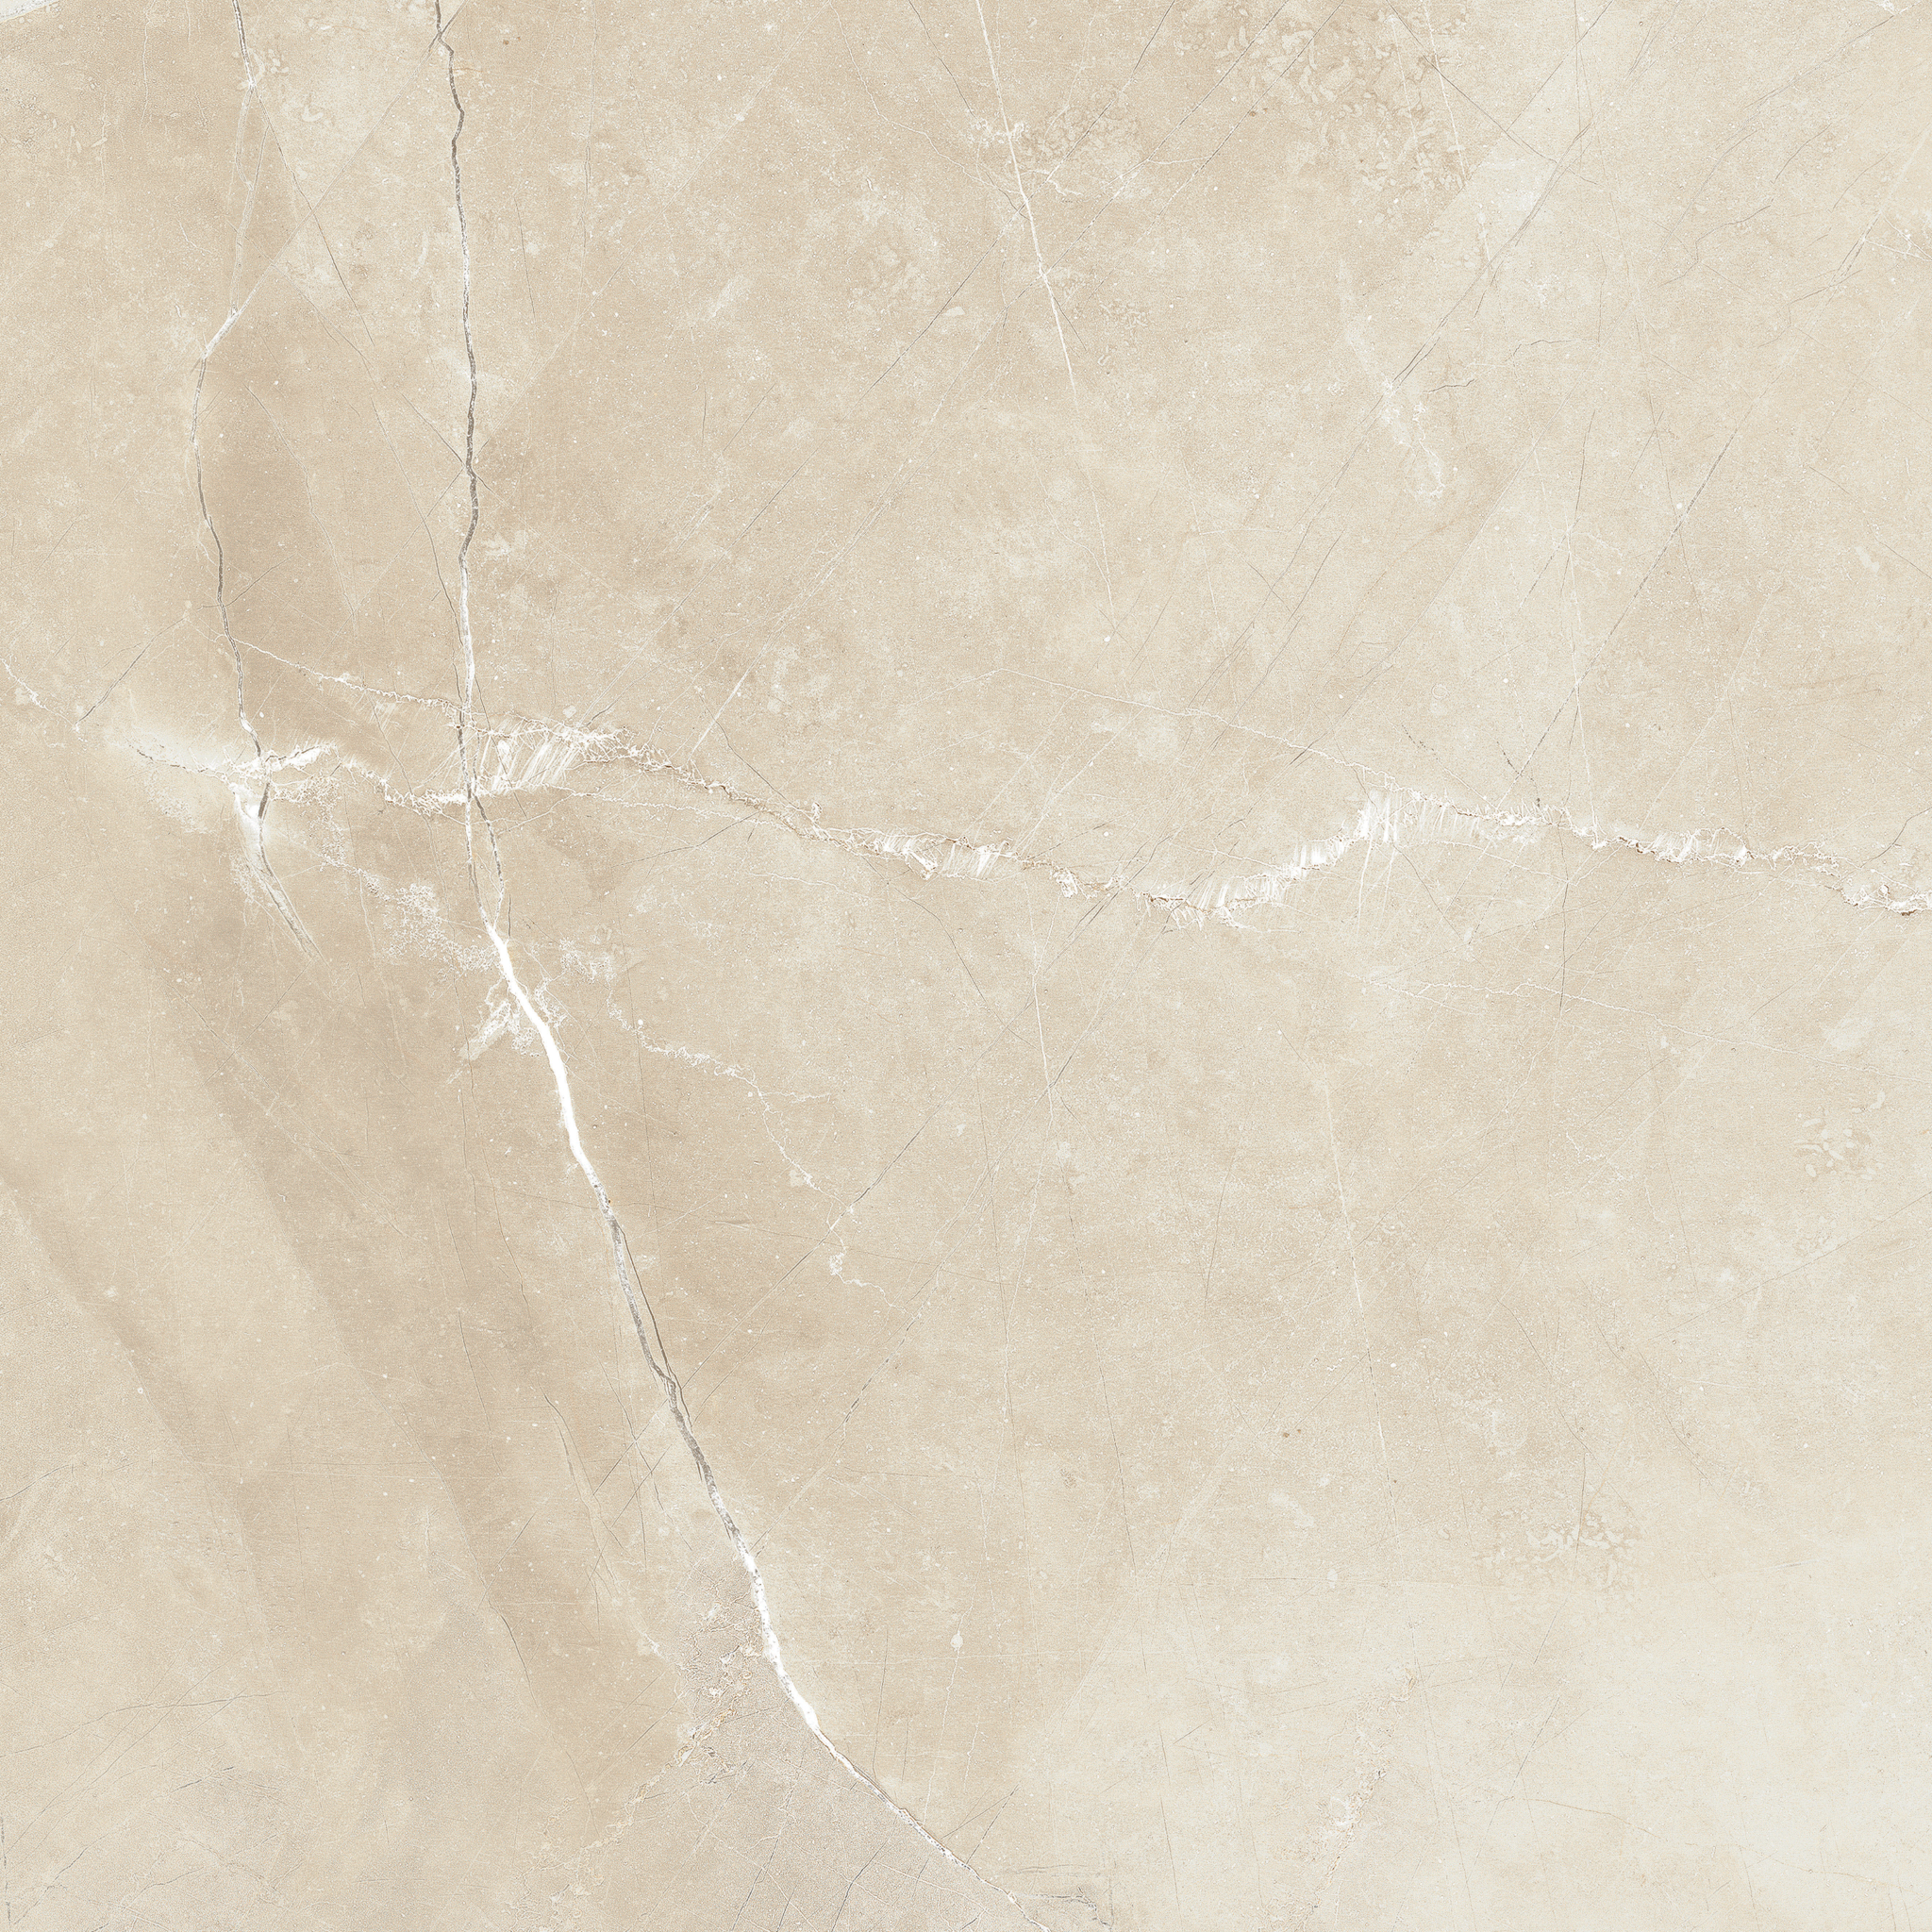 pulpis ivory pattern glazed porcelain field tile from classic anatolia collection distributed by surface group international matte finish pressed edge 18x18 square shape